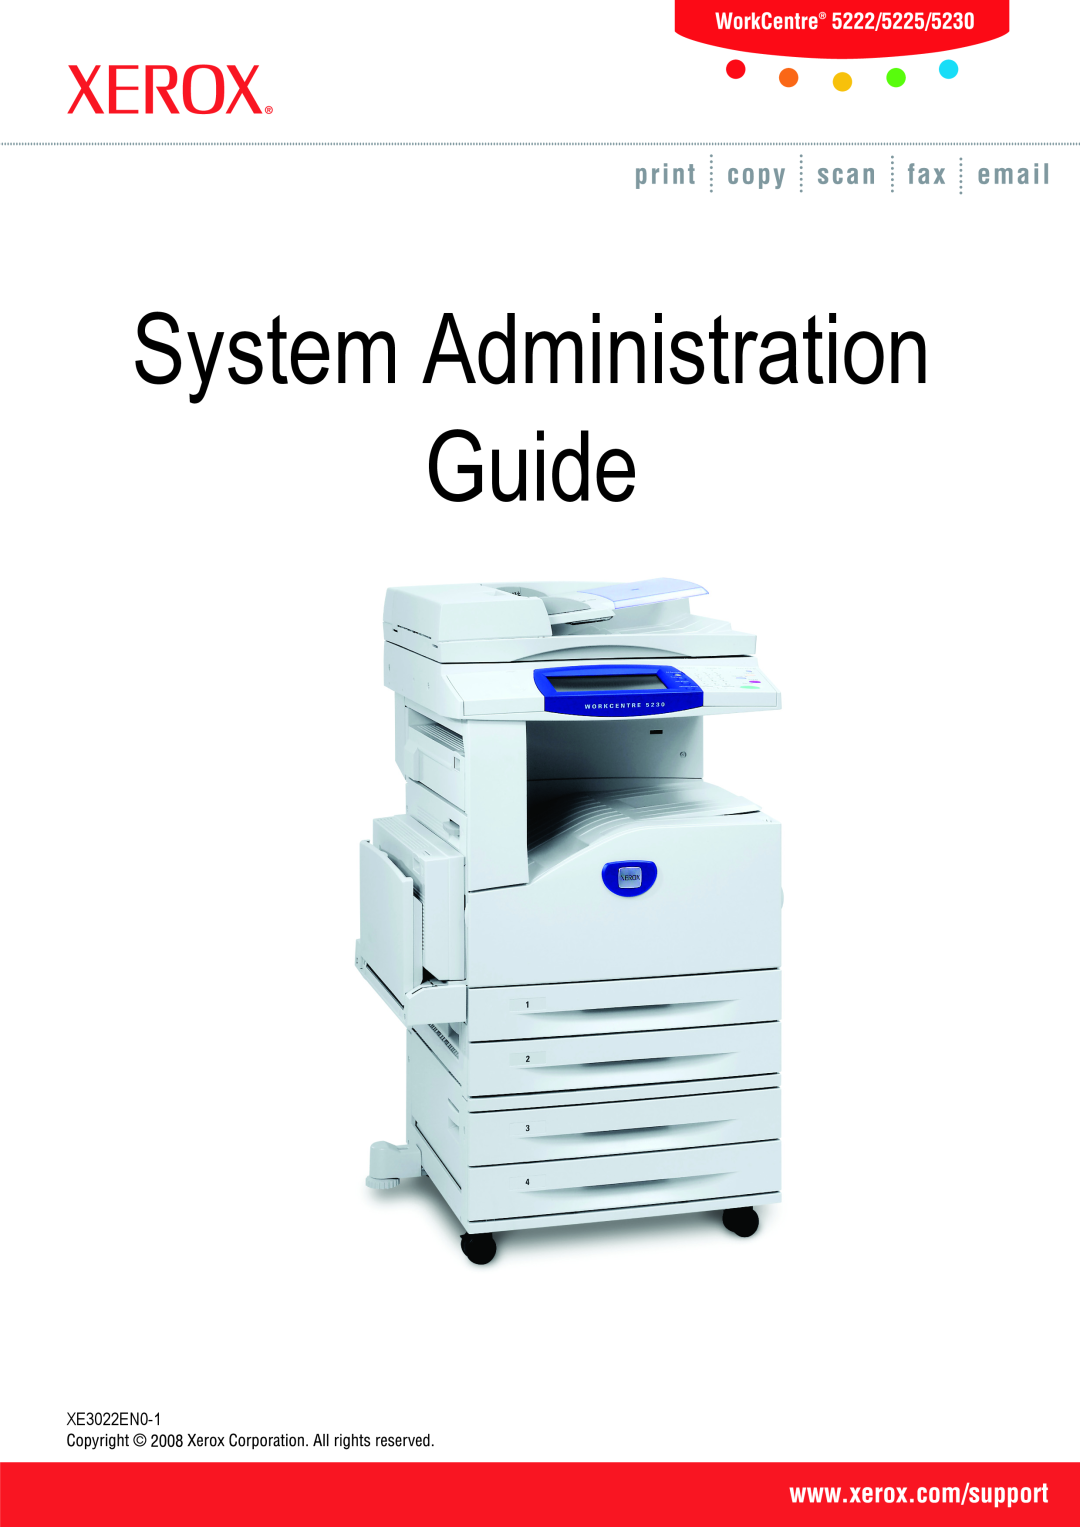 Xerox 5222 manual UserGuideGuide, System Administration 